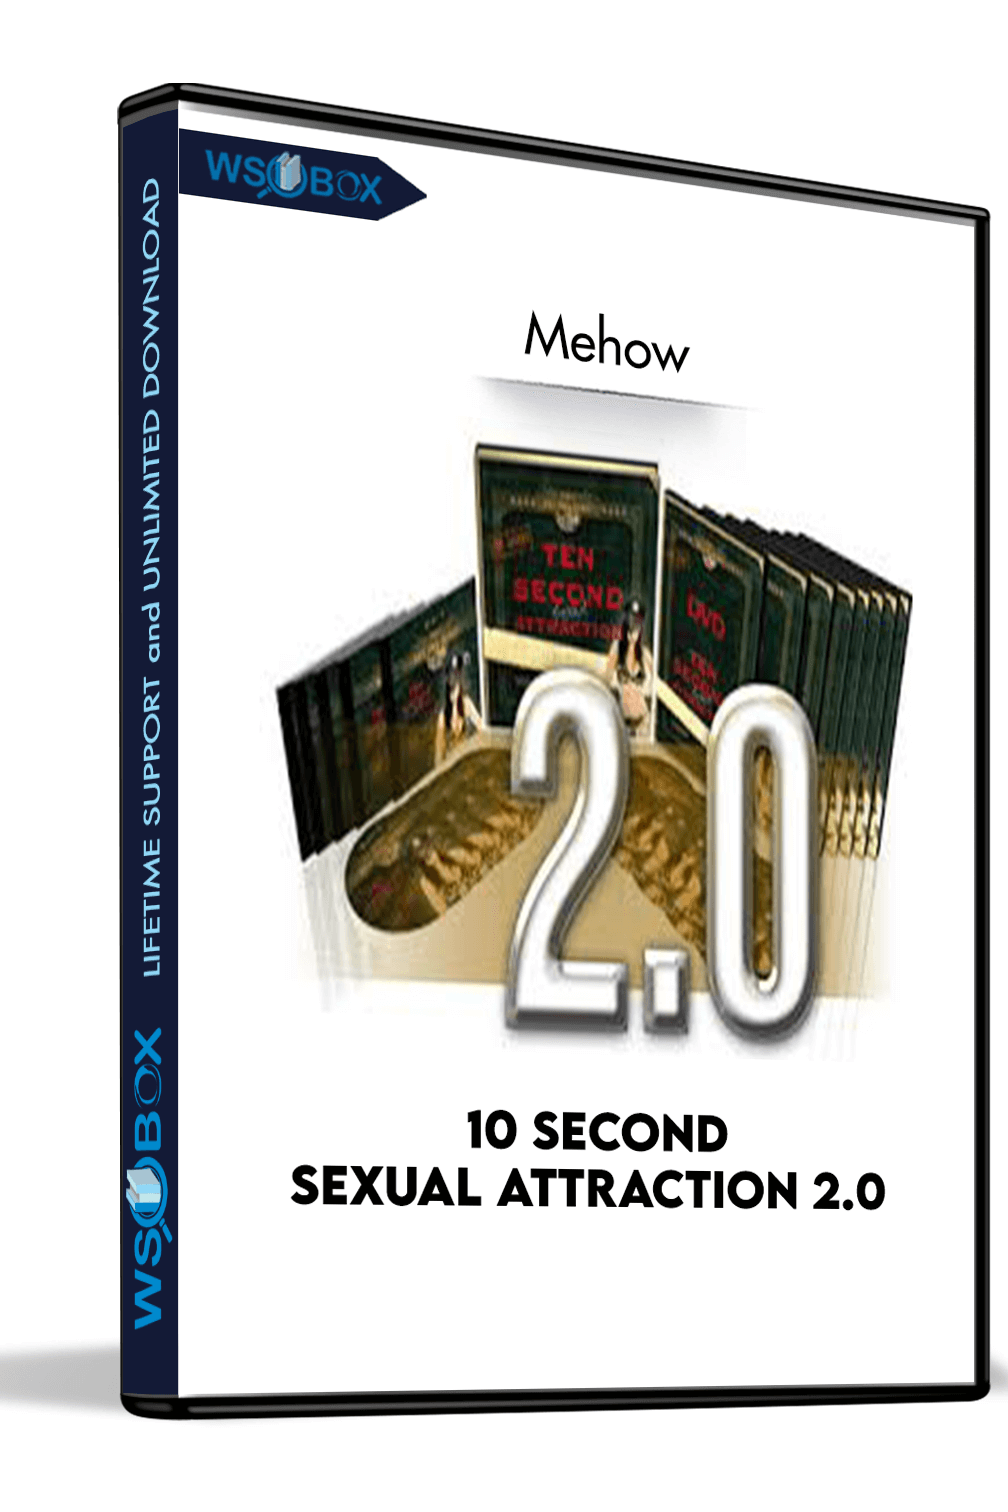 10-second-sexual-attraction-20-mehow